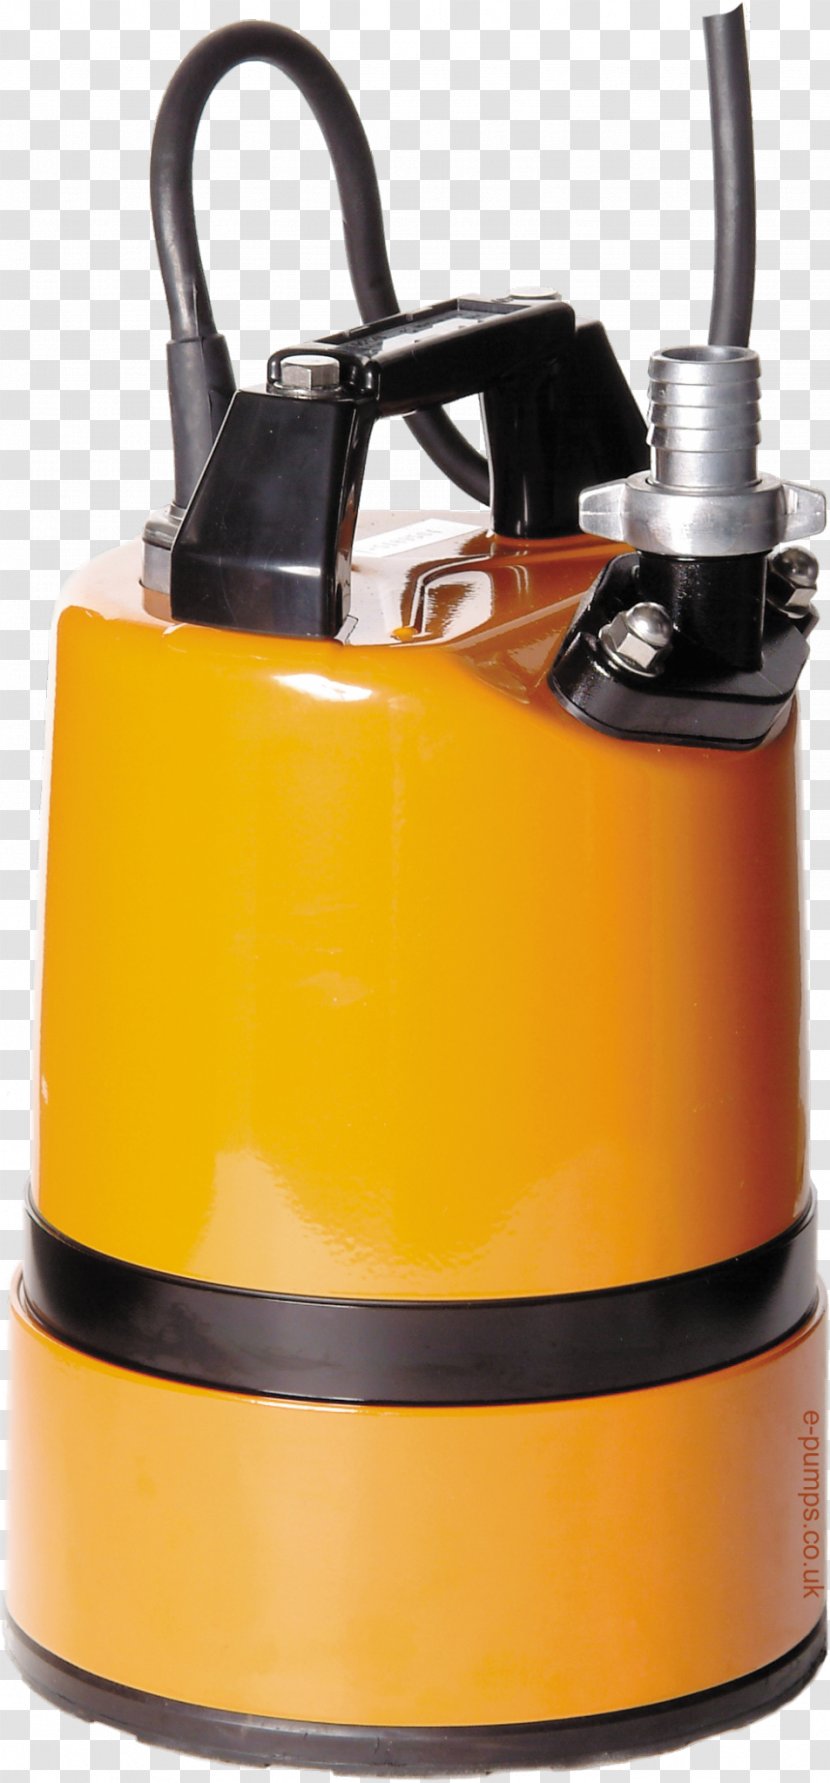 Submersible Pump Sump Centrifugal Drainage - Orange - Puddle Water Transparent PNG